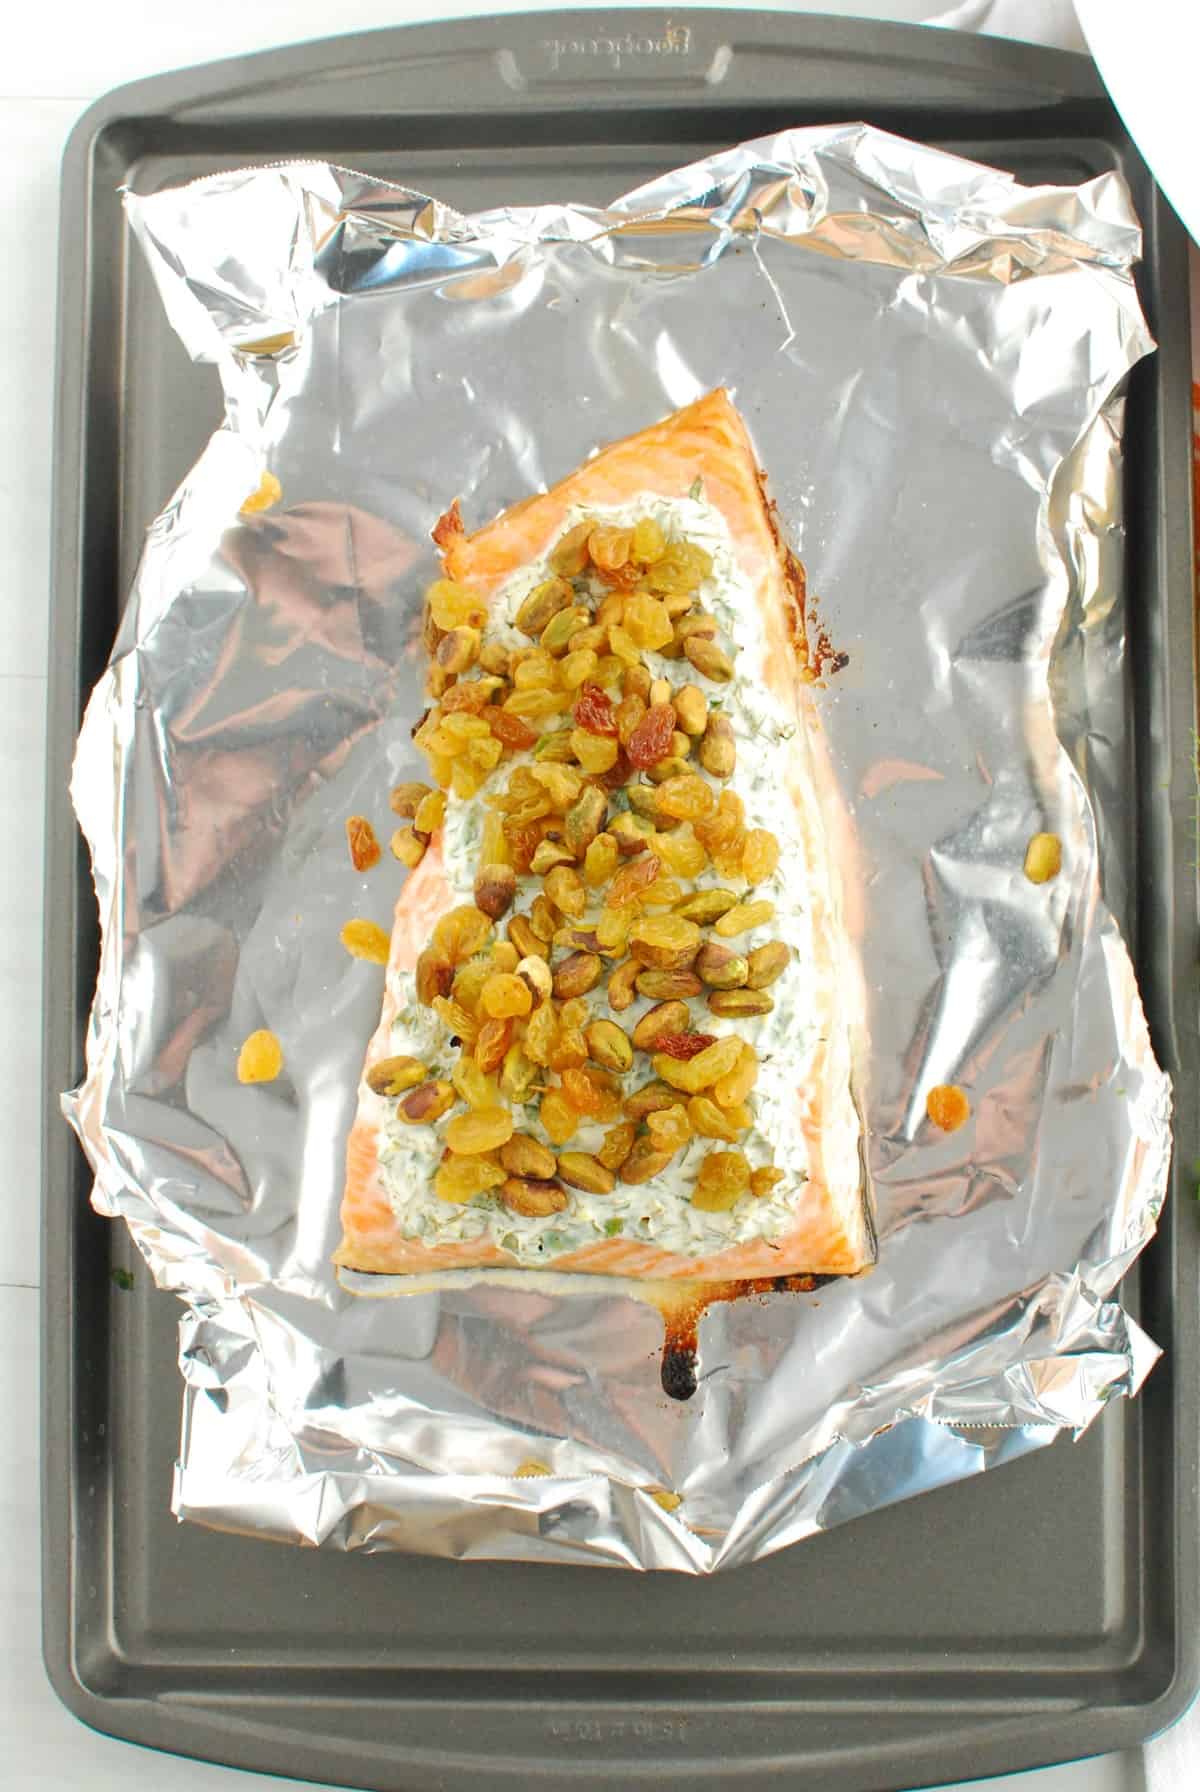 Baked salmon topped with herb yogurt, pistachios, and golden raisins on a foil-lined baking sheet.